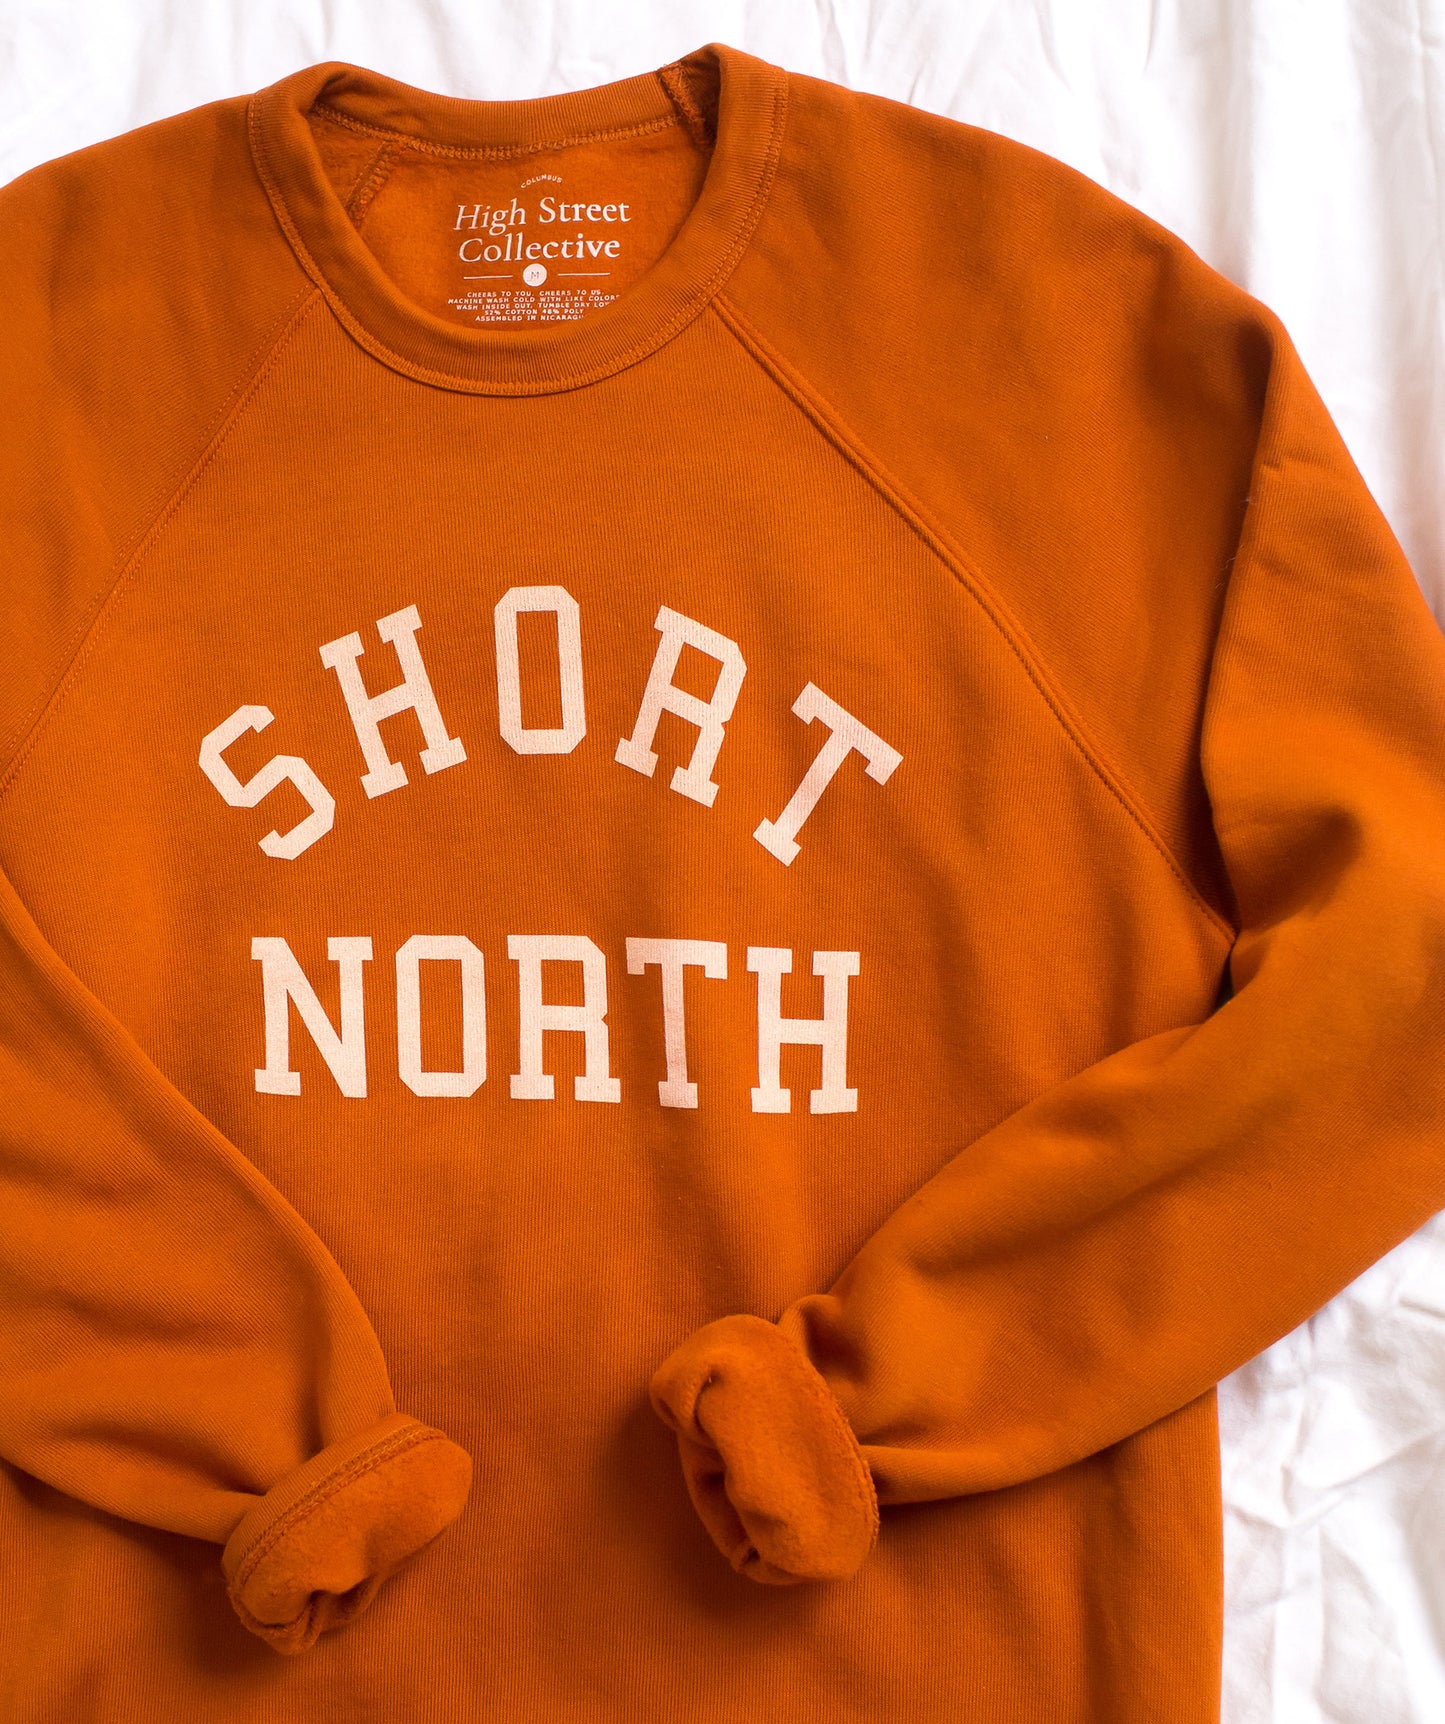 Rust colored slim fit, crewneck sweatshirt with Short North graphic at front. This style has raglan sleeves for a vintage look.